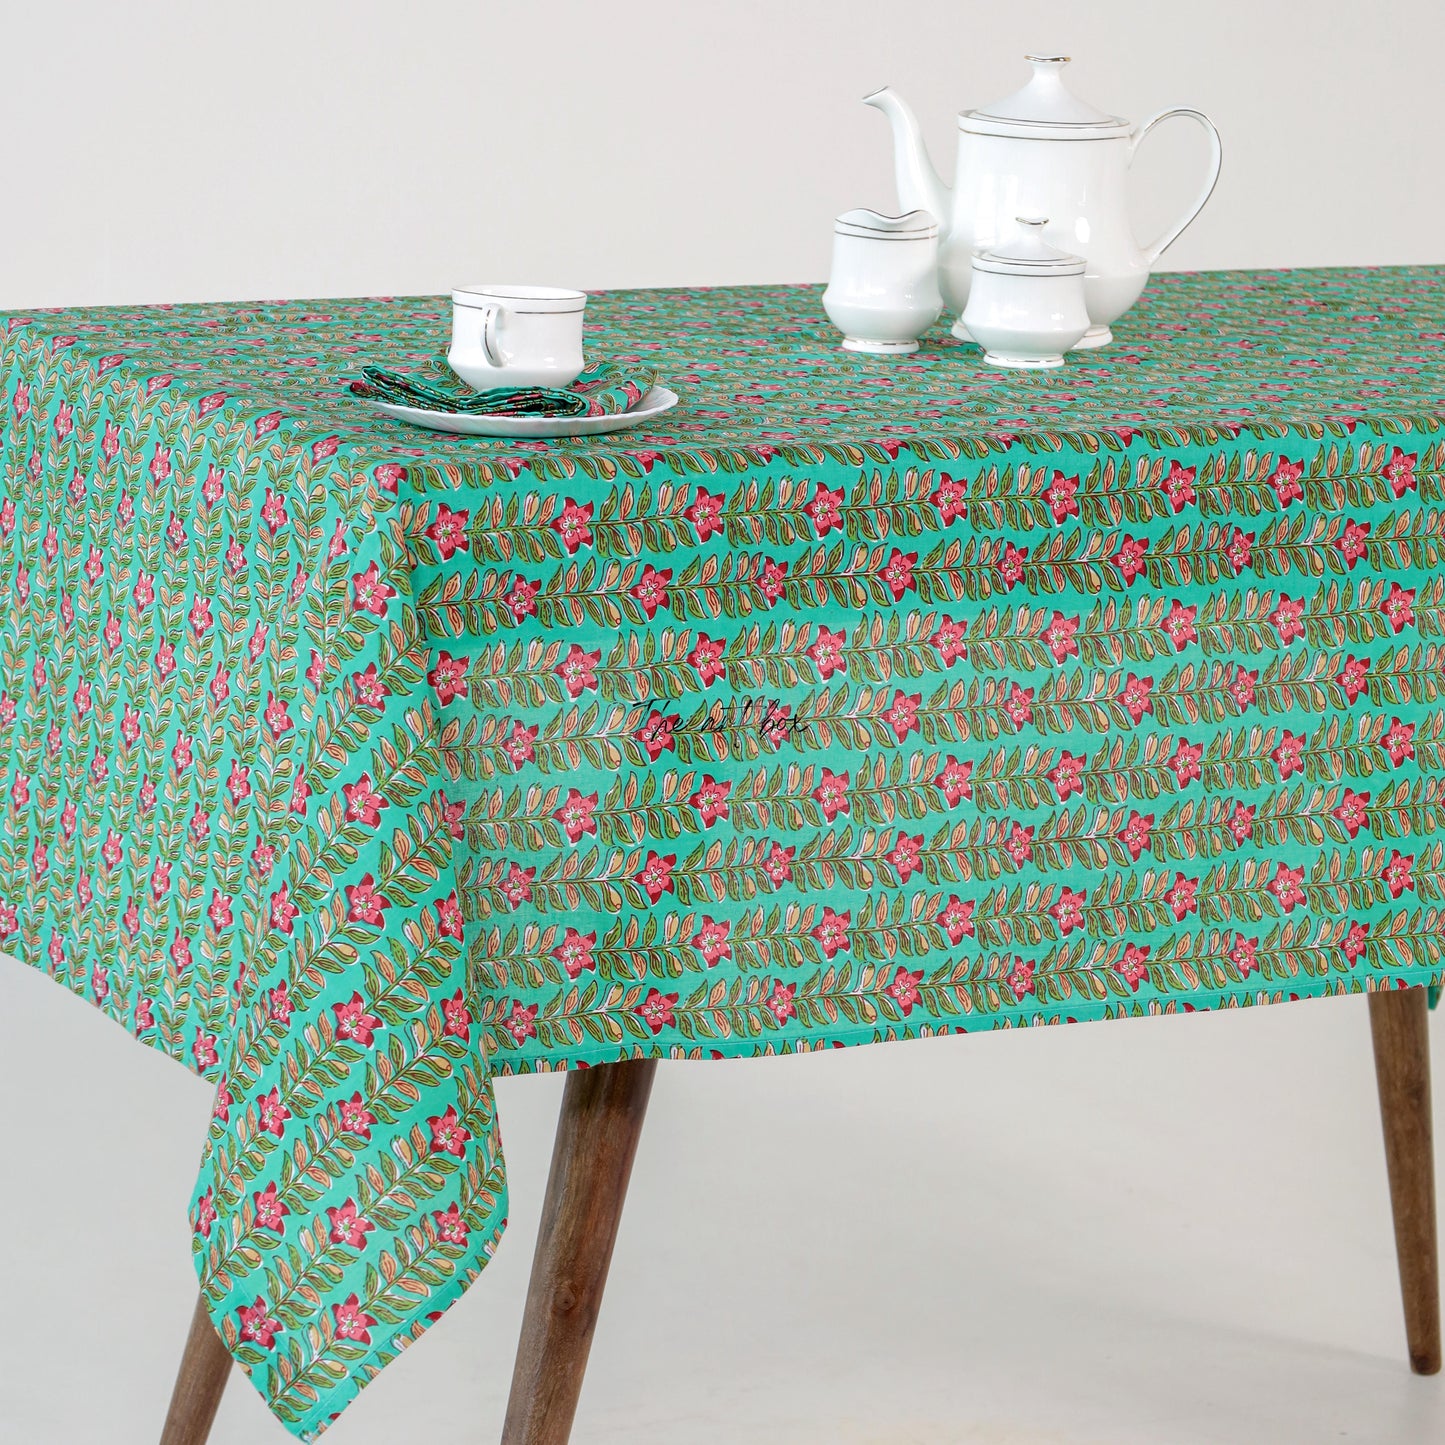 Green Floral Printed Table Cover